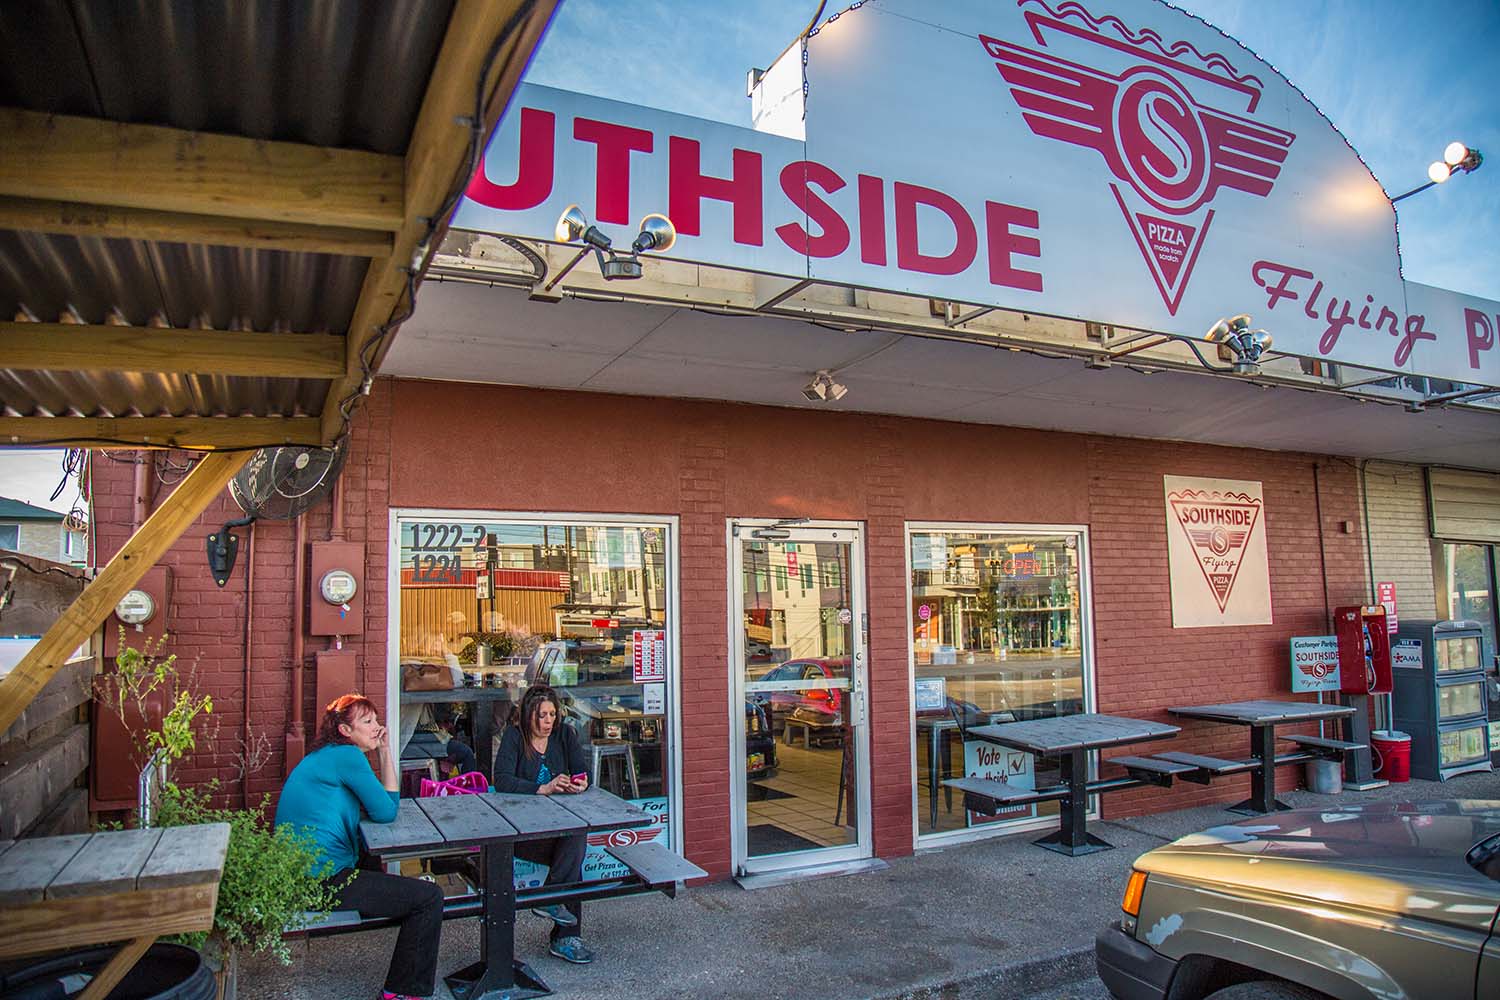 Artisan quality pies at Southside Flying Pizza on South Lamar. Photo: Will Taylor